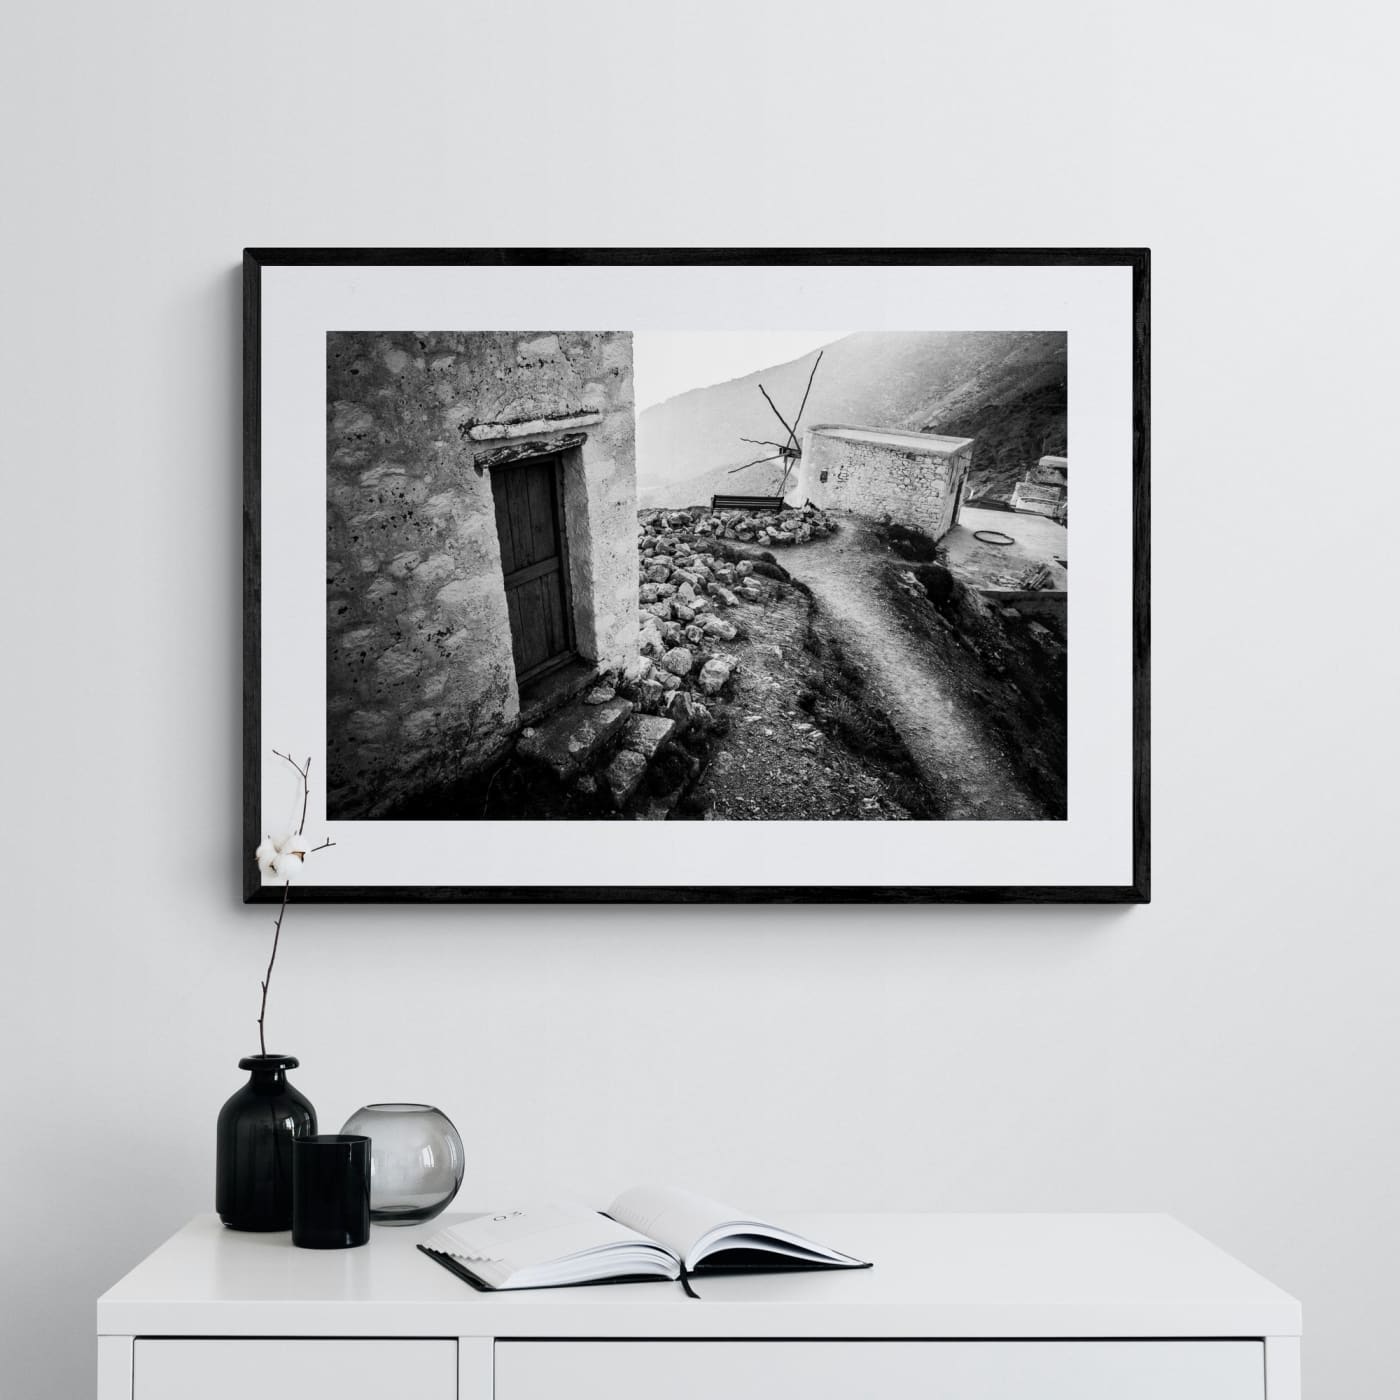 Black and White Photography Wall Art Greece | Mills in Olympos Karpathos Dodecanese by George Tatakis - single framed photo